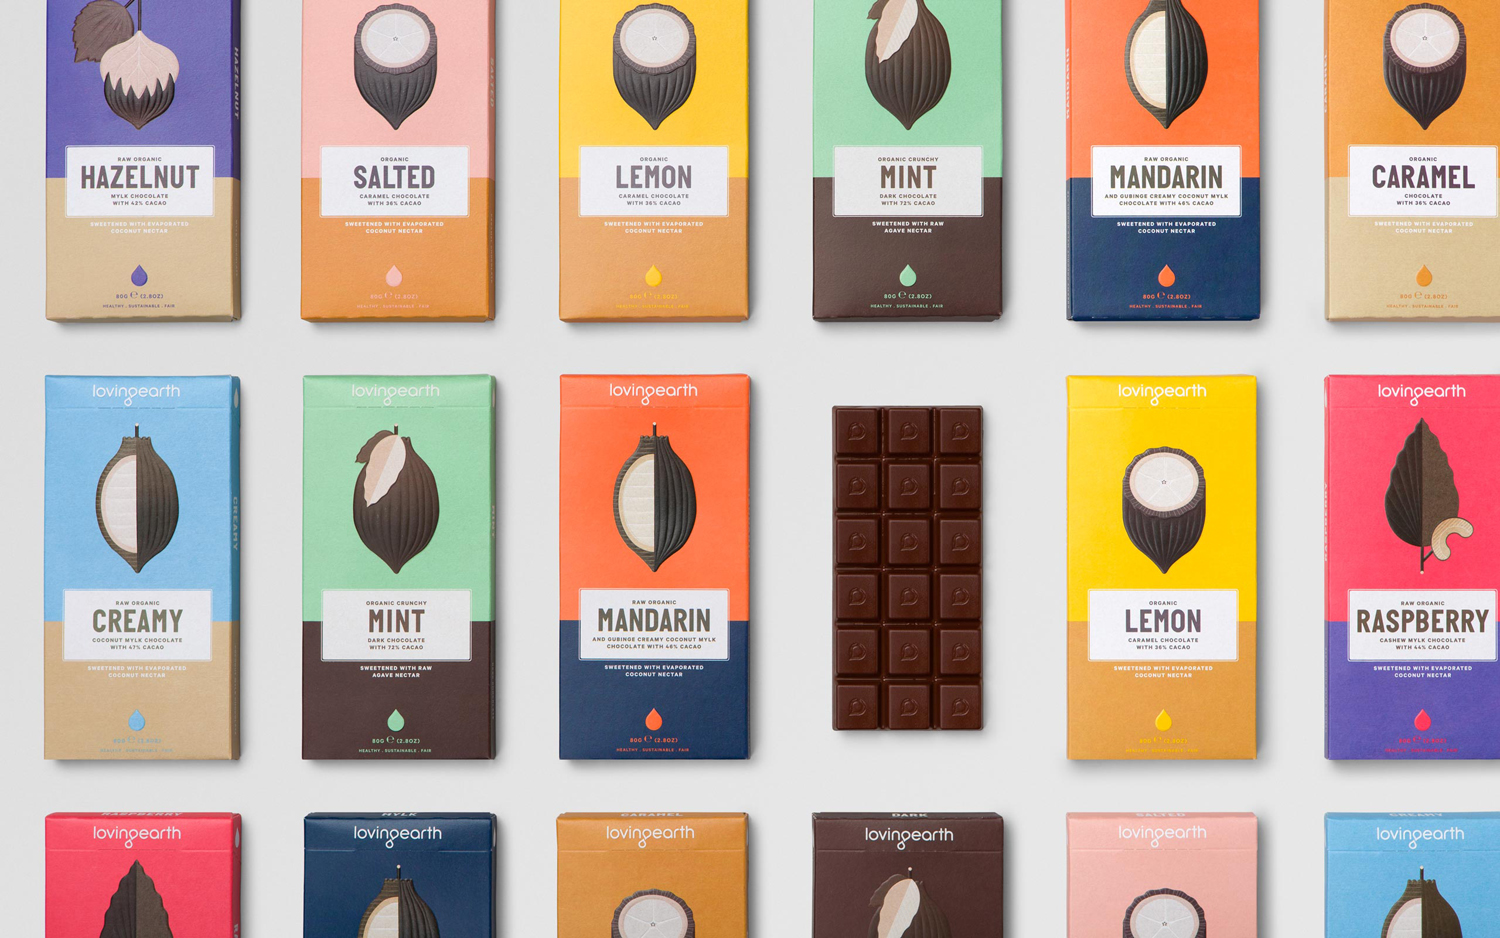 Australian Packaging Design – Loving Earth by Round, Melbourne